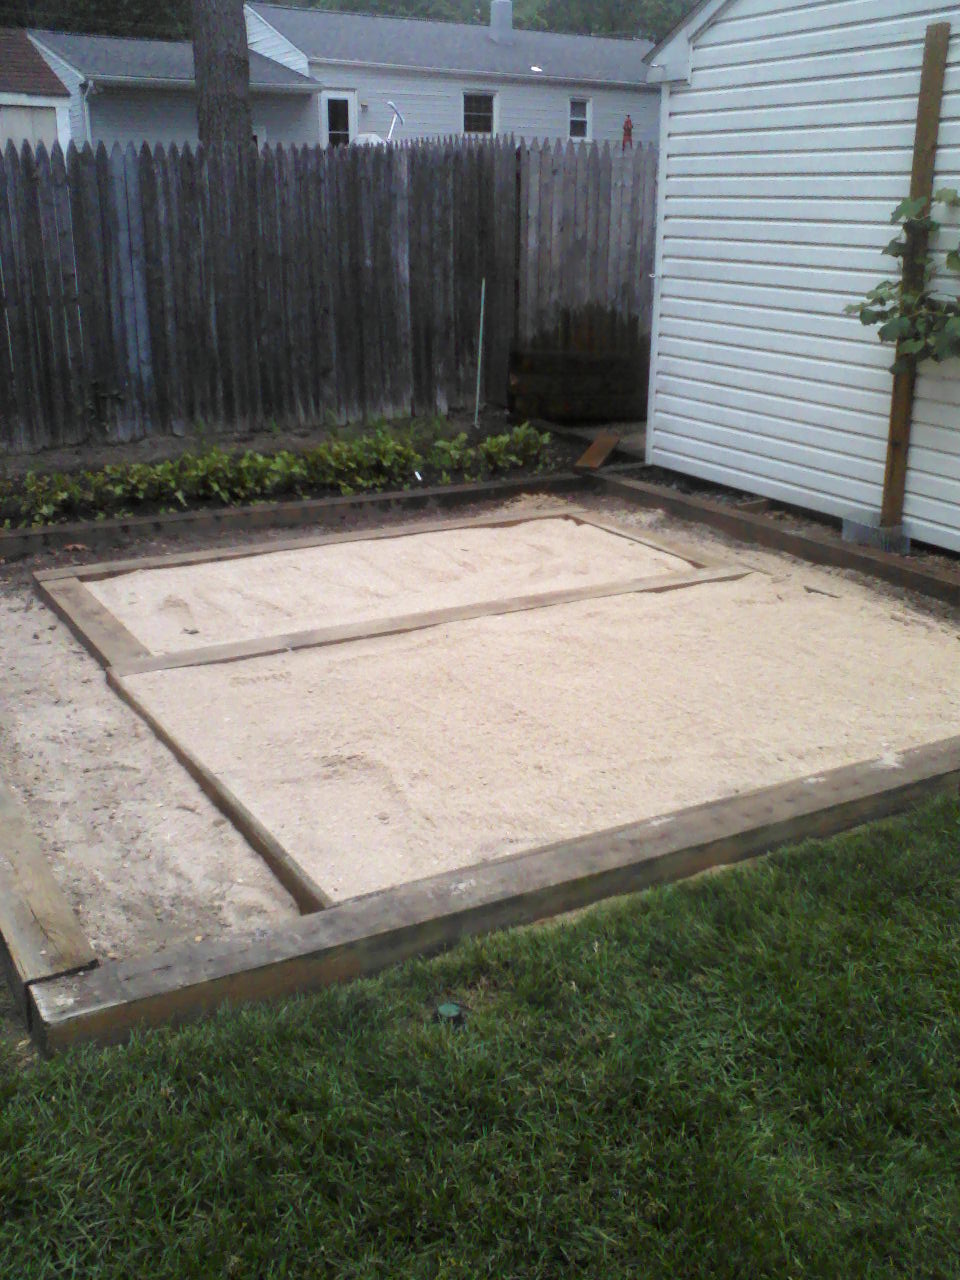 Laying out the base. Sand added.